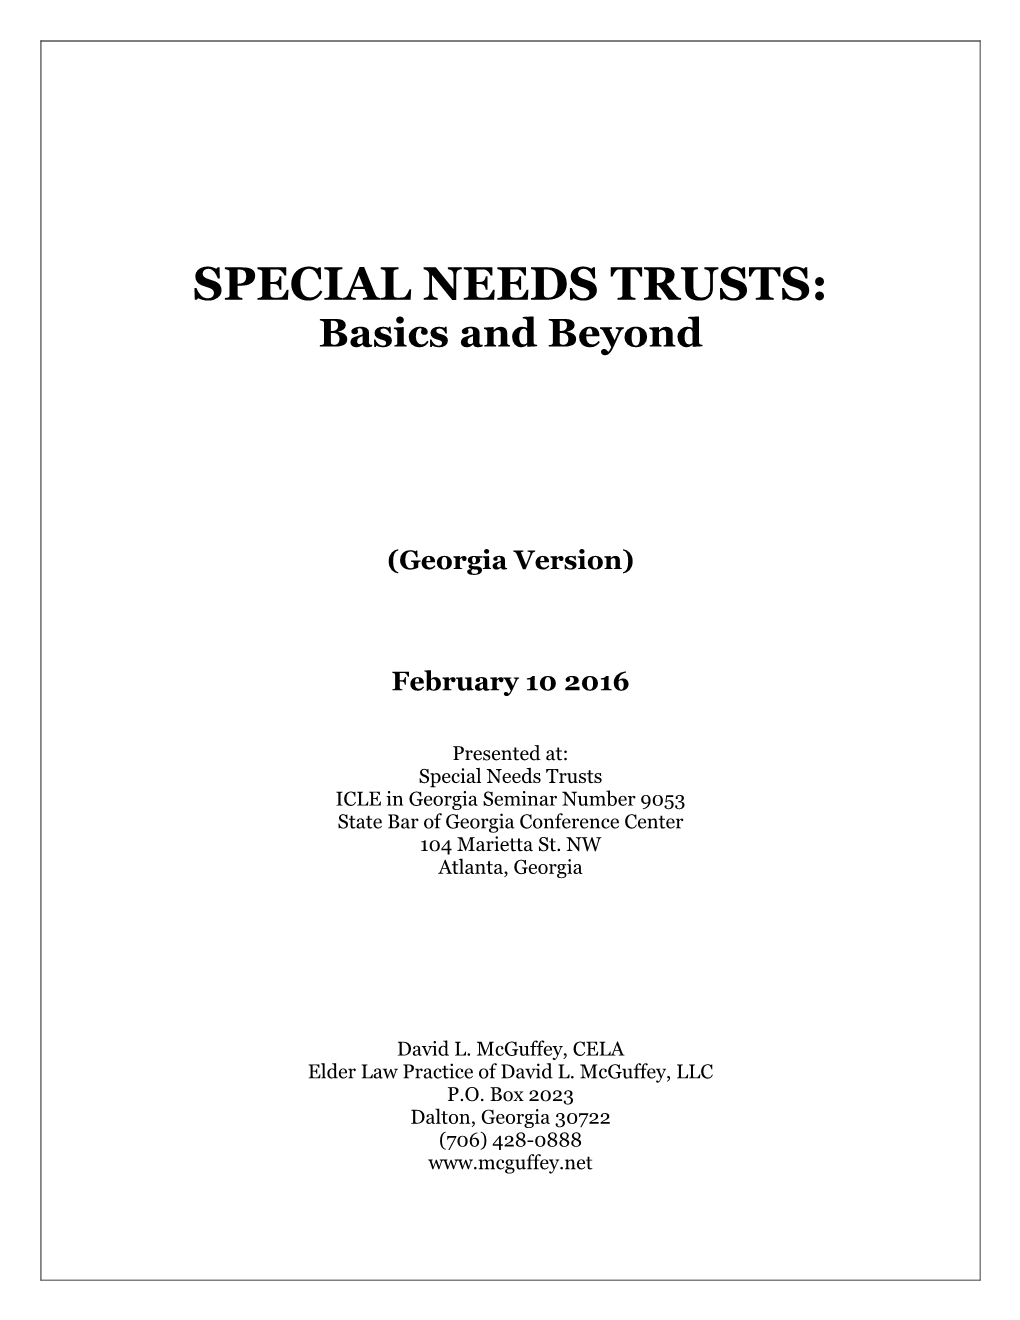 SPECIAL NEEDS TRUSTS: Basics and Beyond